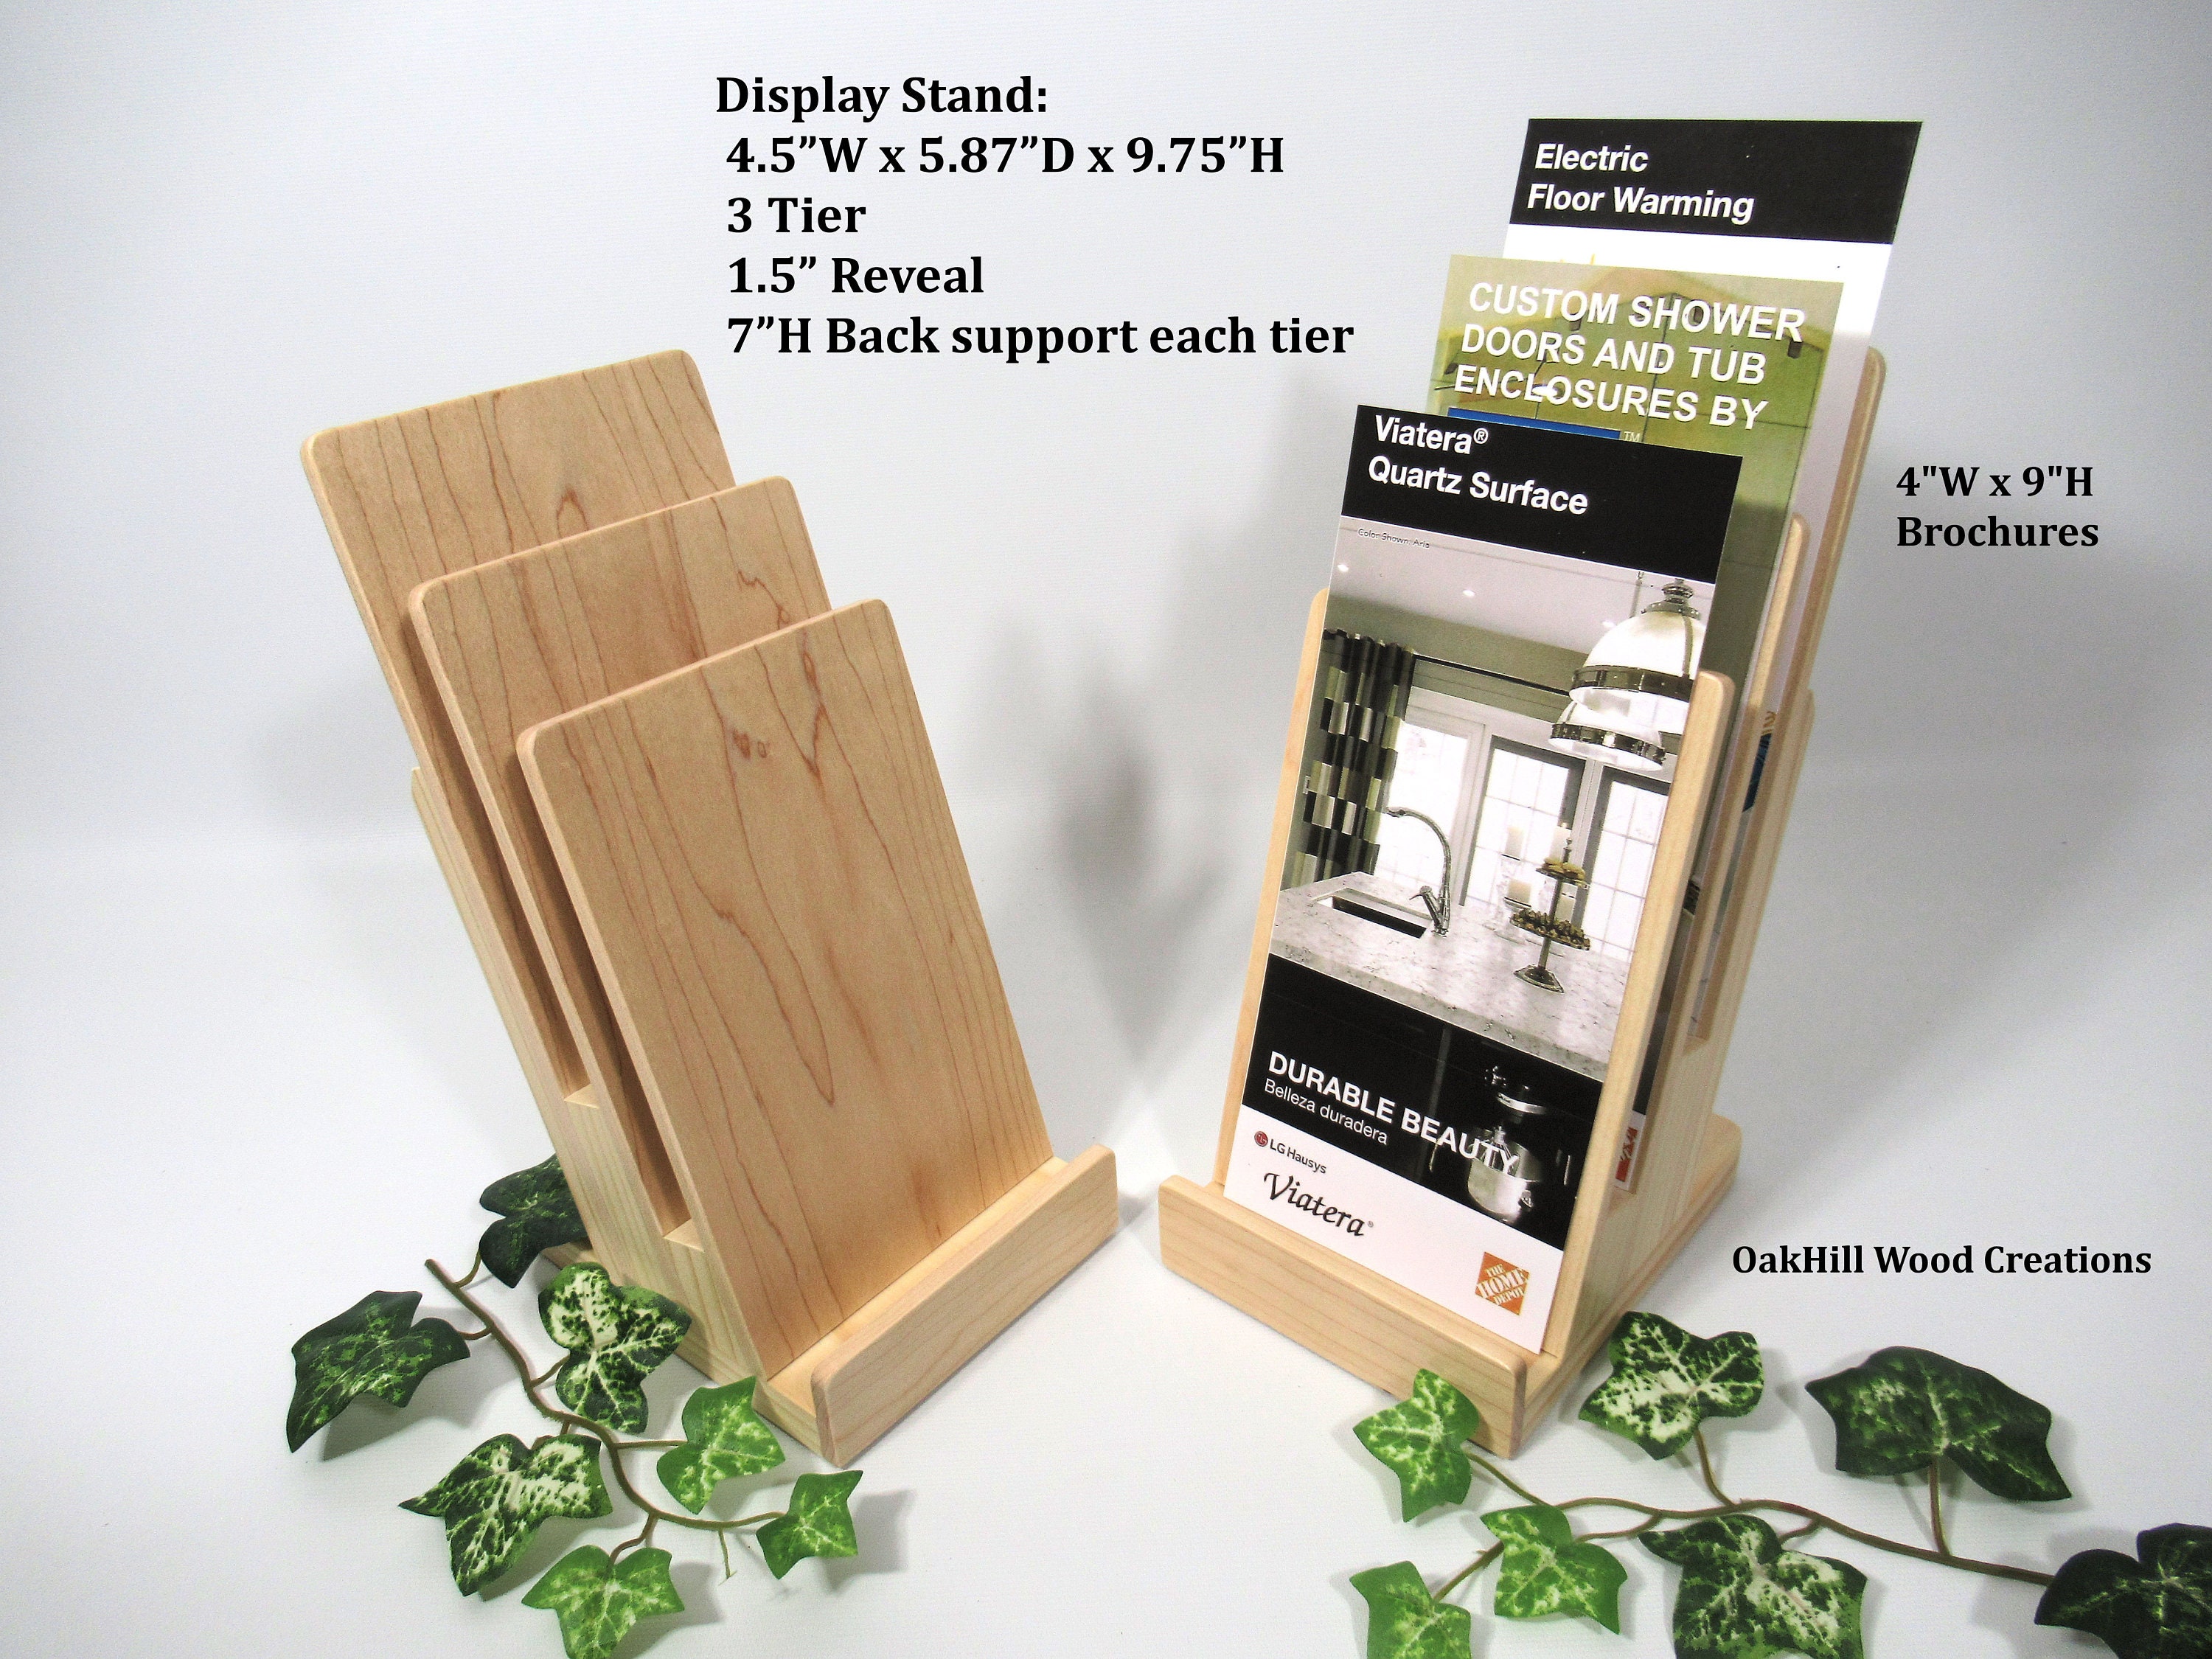 DS THE DISPLAY STORE 3 Tier Rotating Sticker Display Stand For